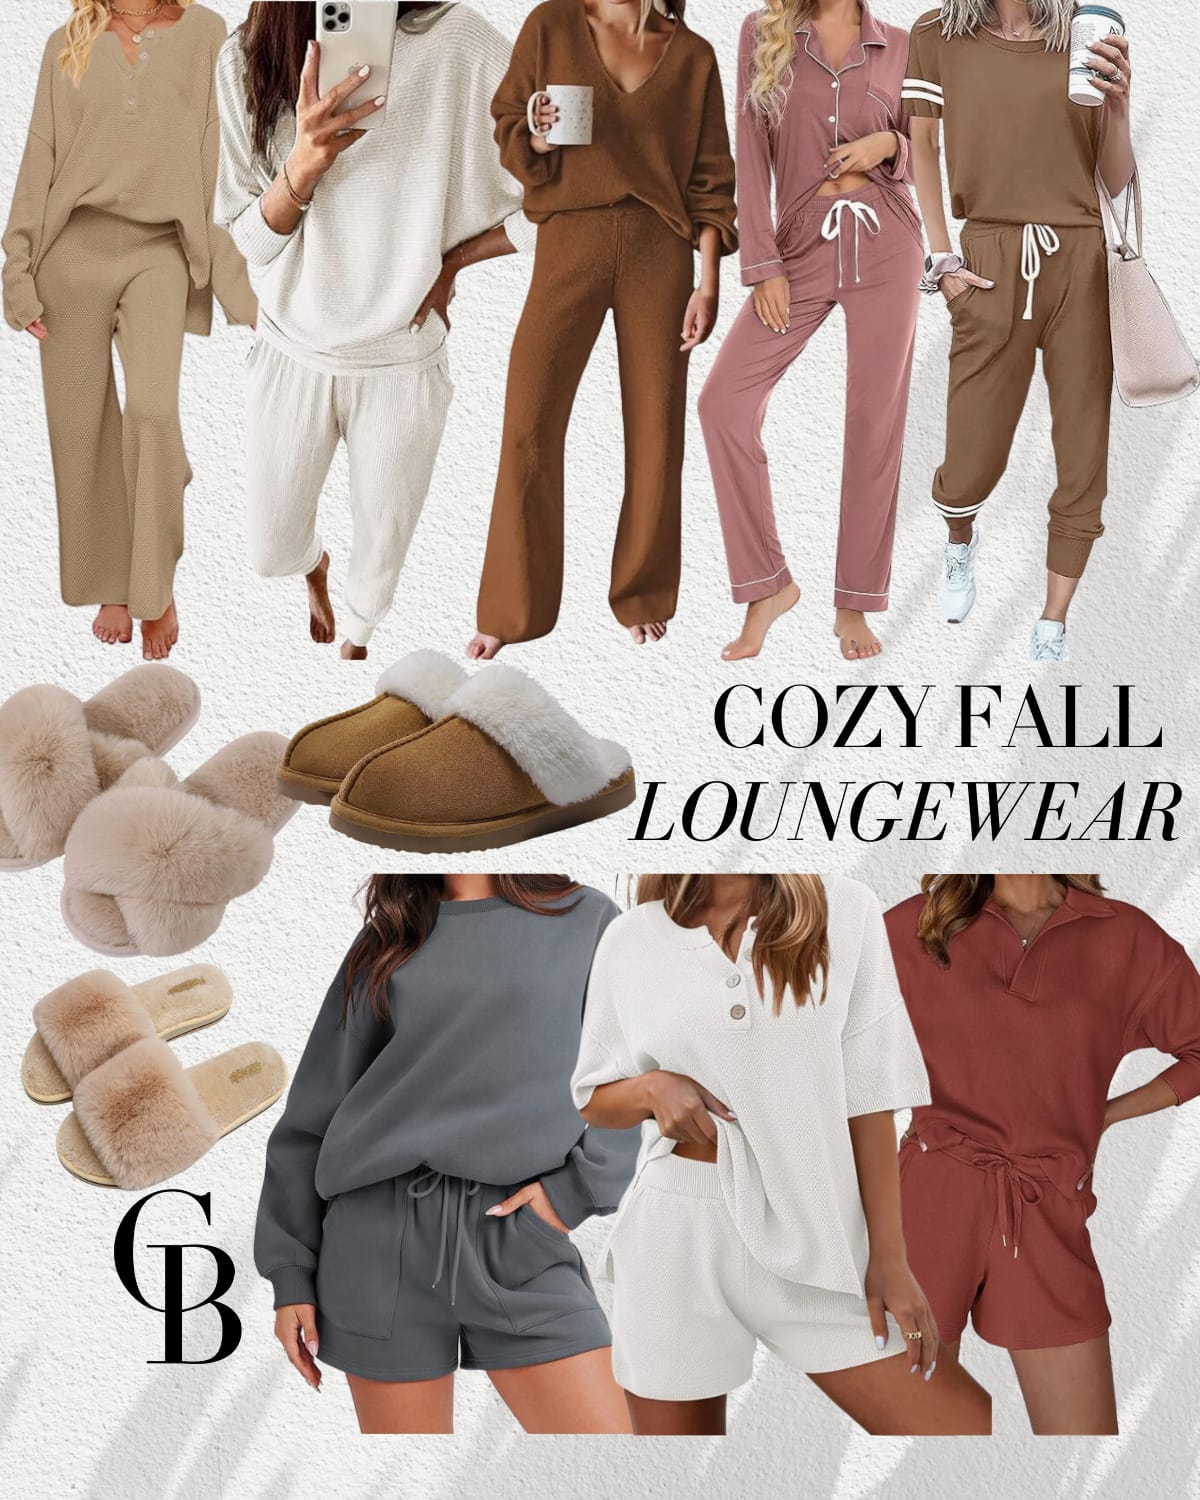 cozy home styling fall edition | #cozy #home #styling #fall #edition #autumn #fashion #loungewear #sweater #lounge #slippers #fauxfur